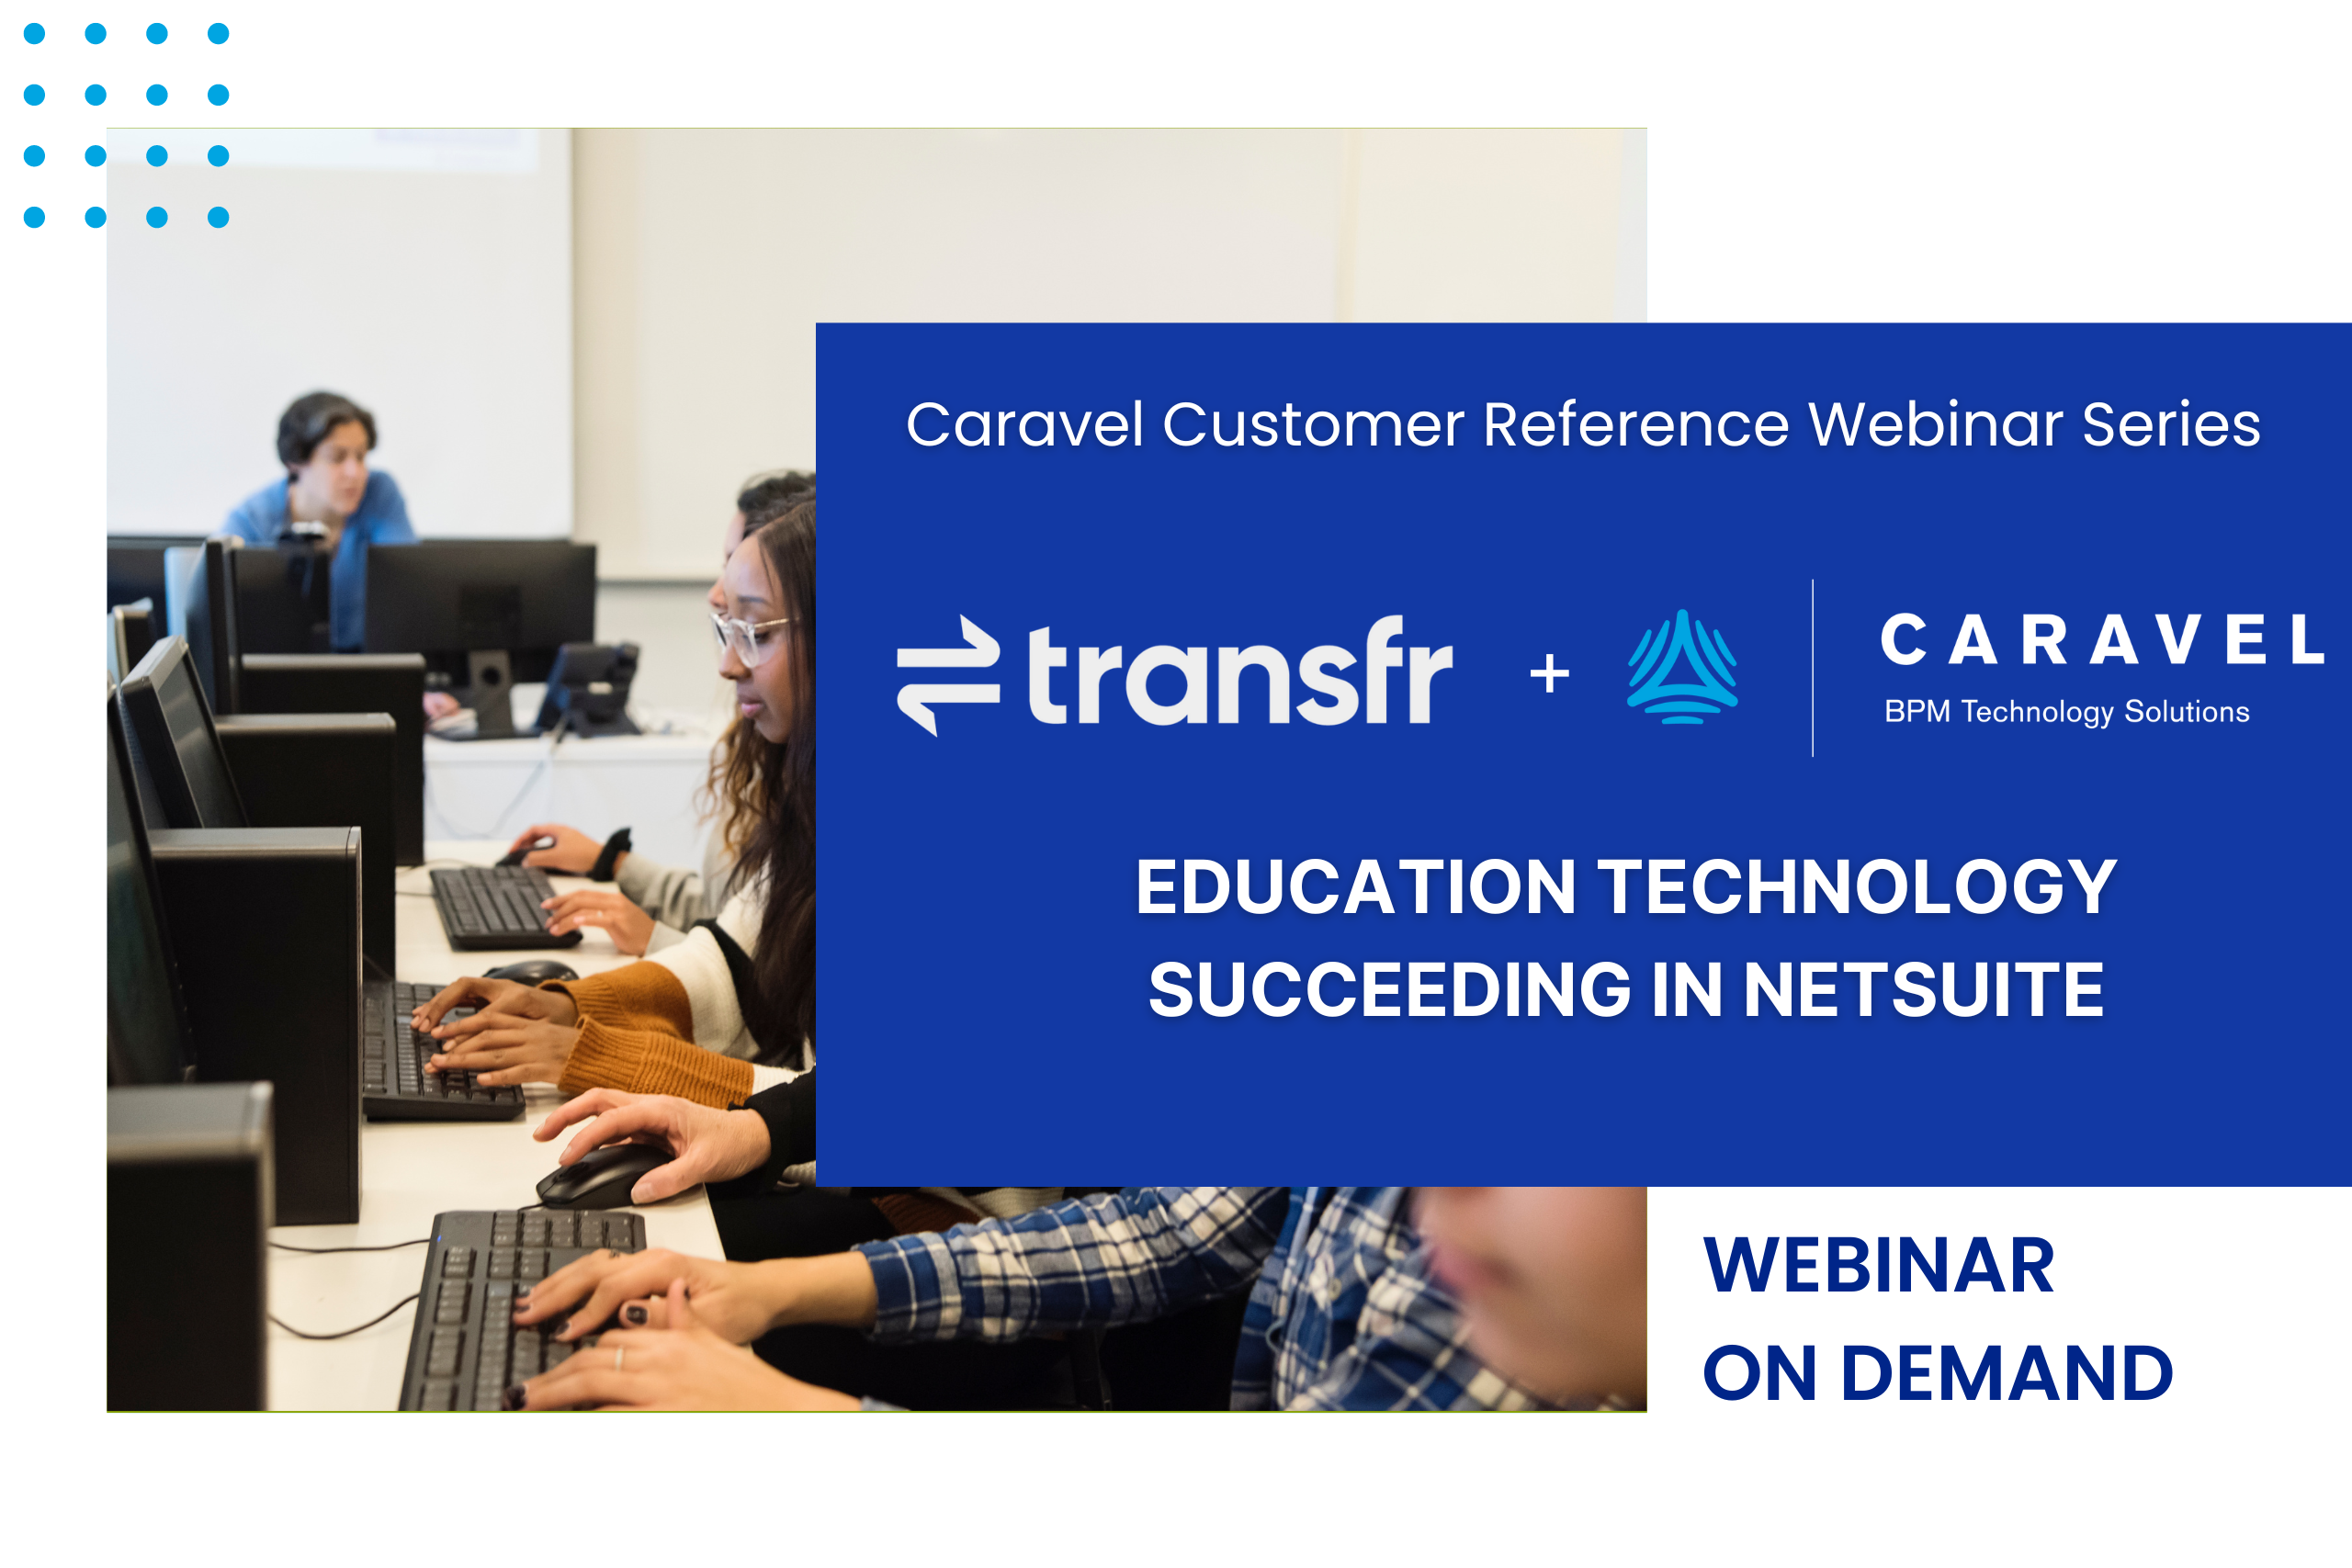 Transfr + Caravel: Education Technology Succeeding in NetSuite